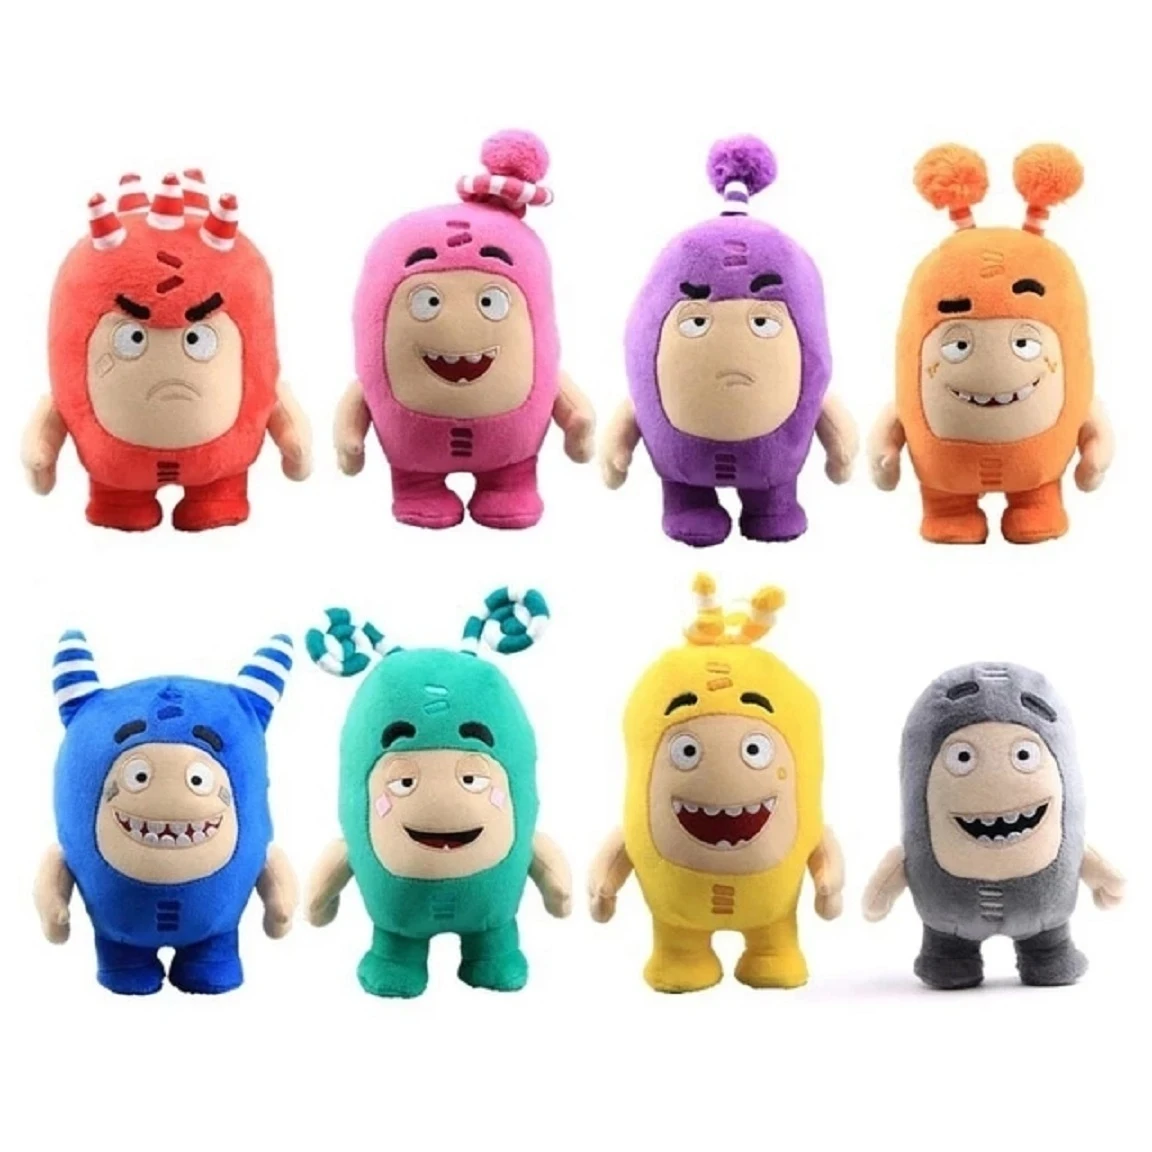 8pcs/Lot Oddbods Cartoon 18-24CM Fuse Jeff Newt Odd ZEE Bods Stuffed Plush Toy Doll For Kids Gifts PP Cotton Home Decoration 8pcs geometric shapes stencils multi functional printing stencils for wall home